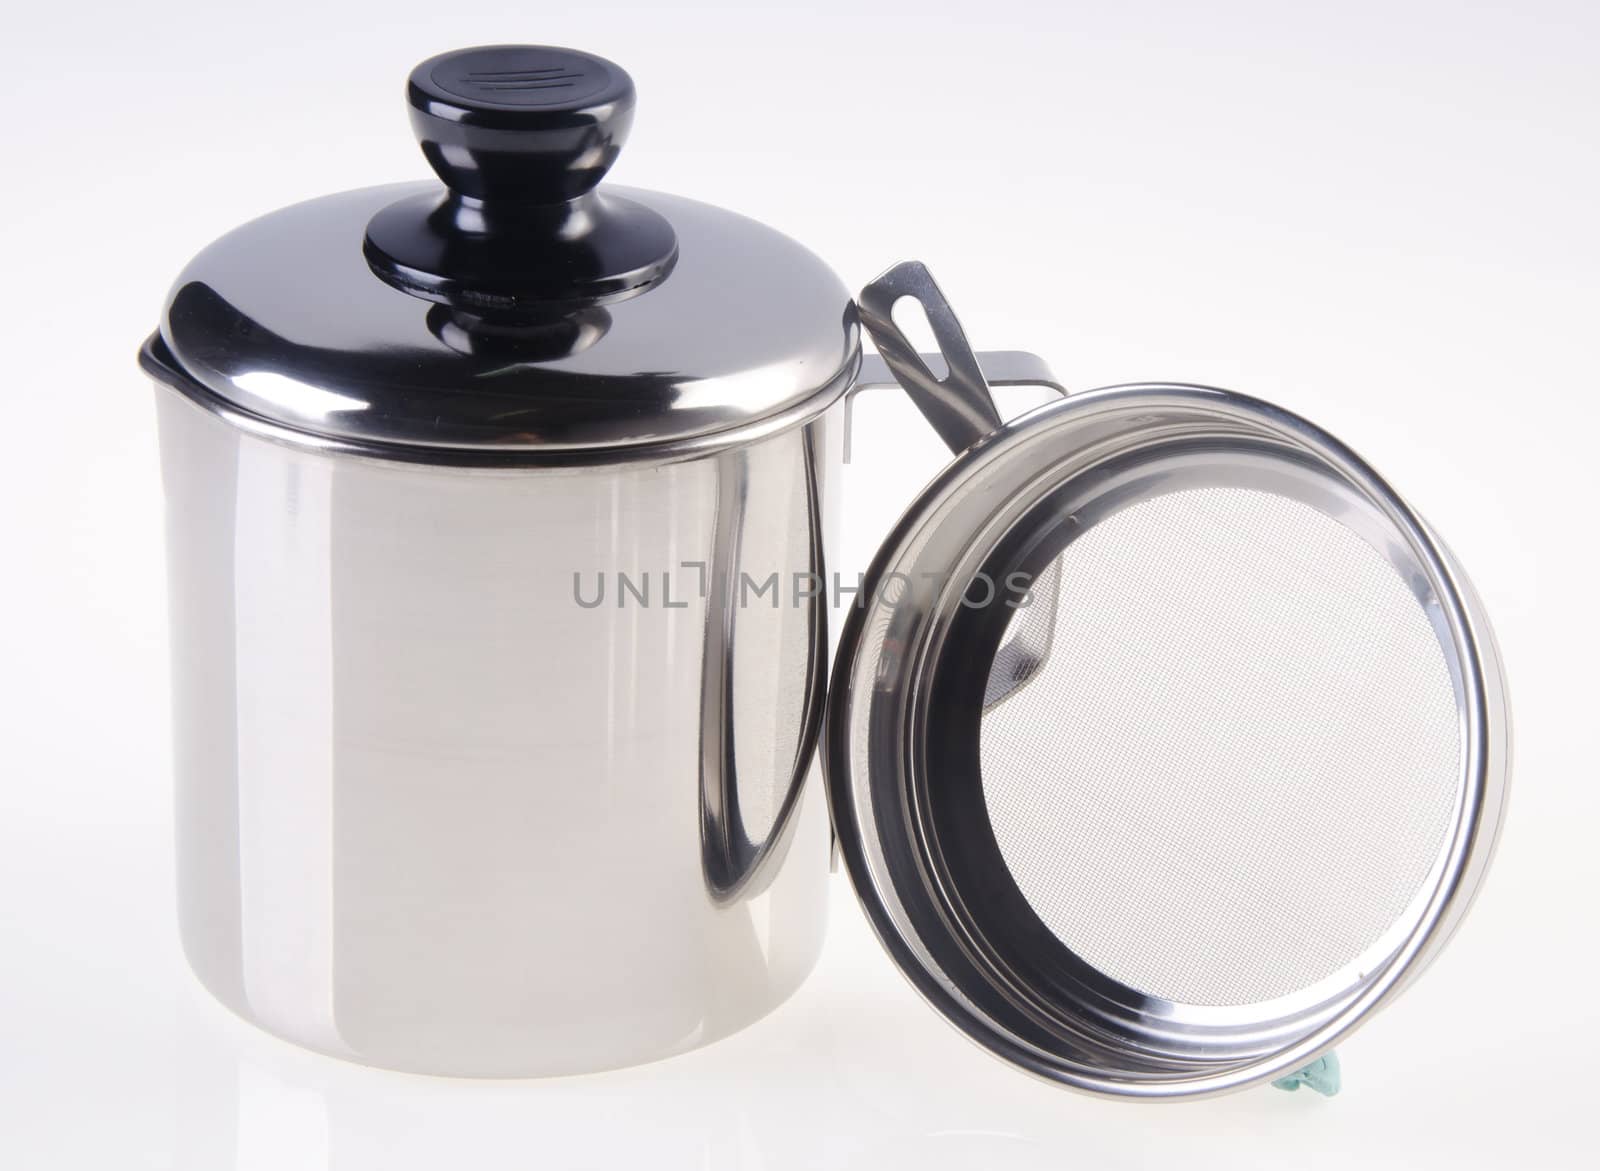 pot, Stainless steel pot on white background